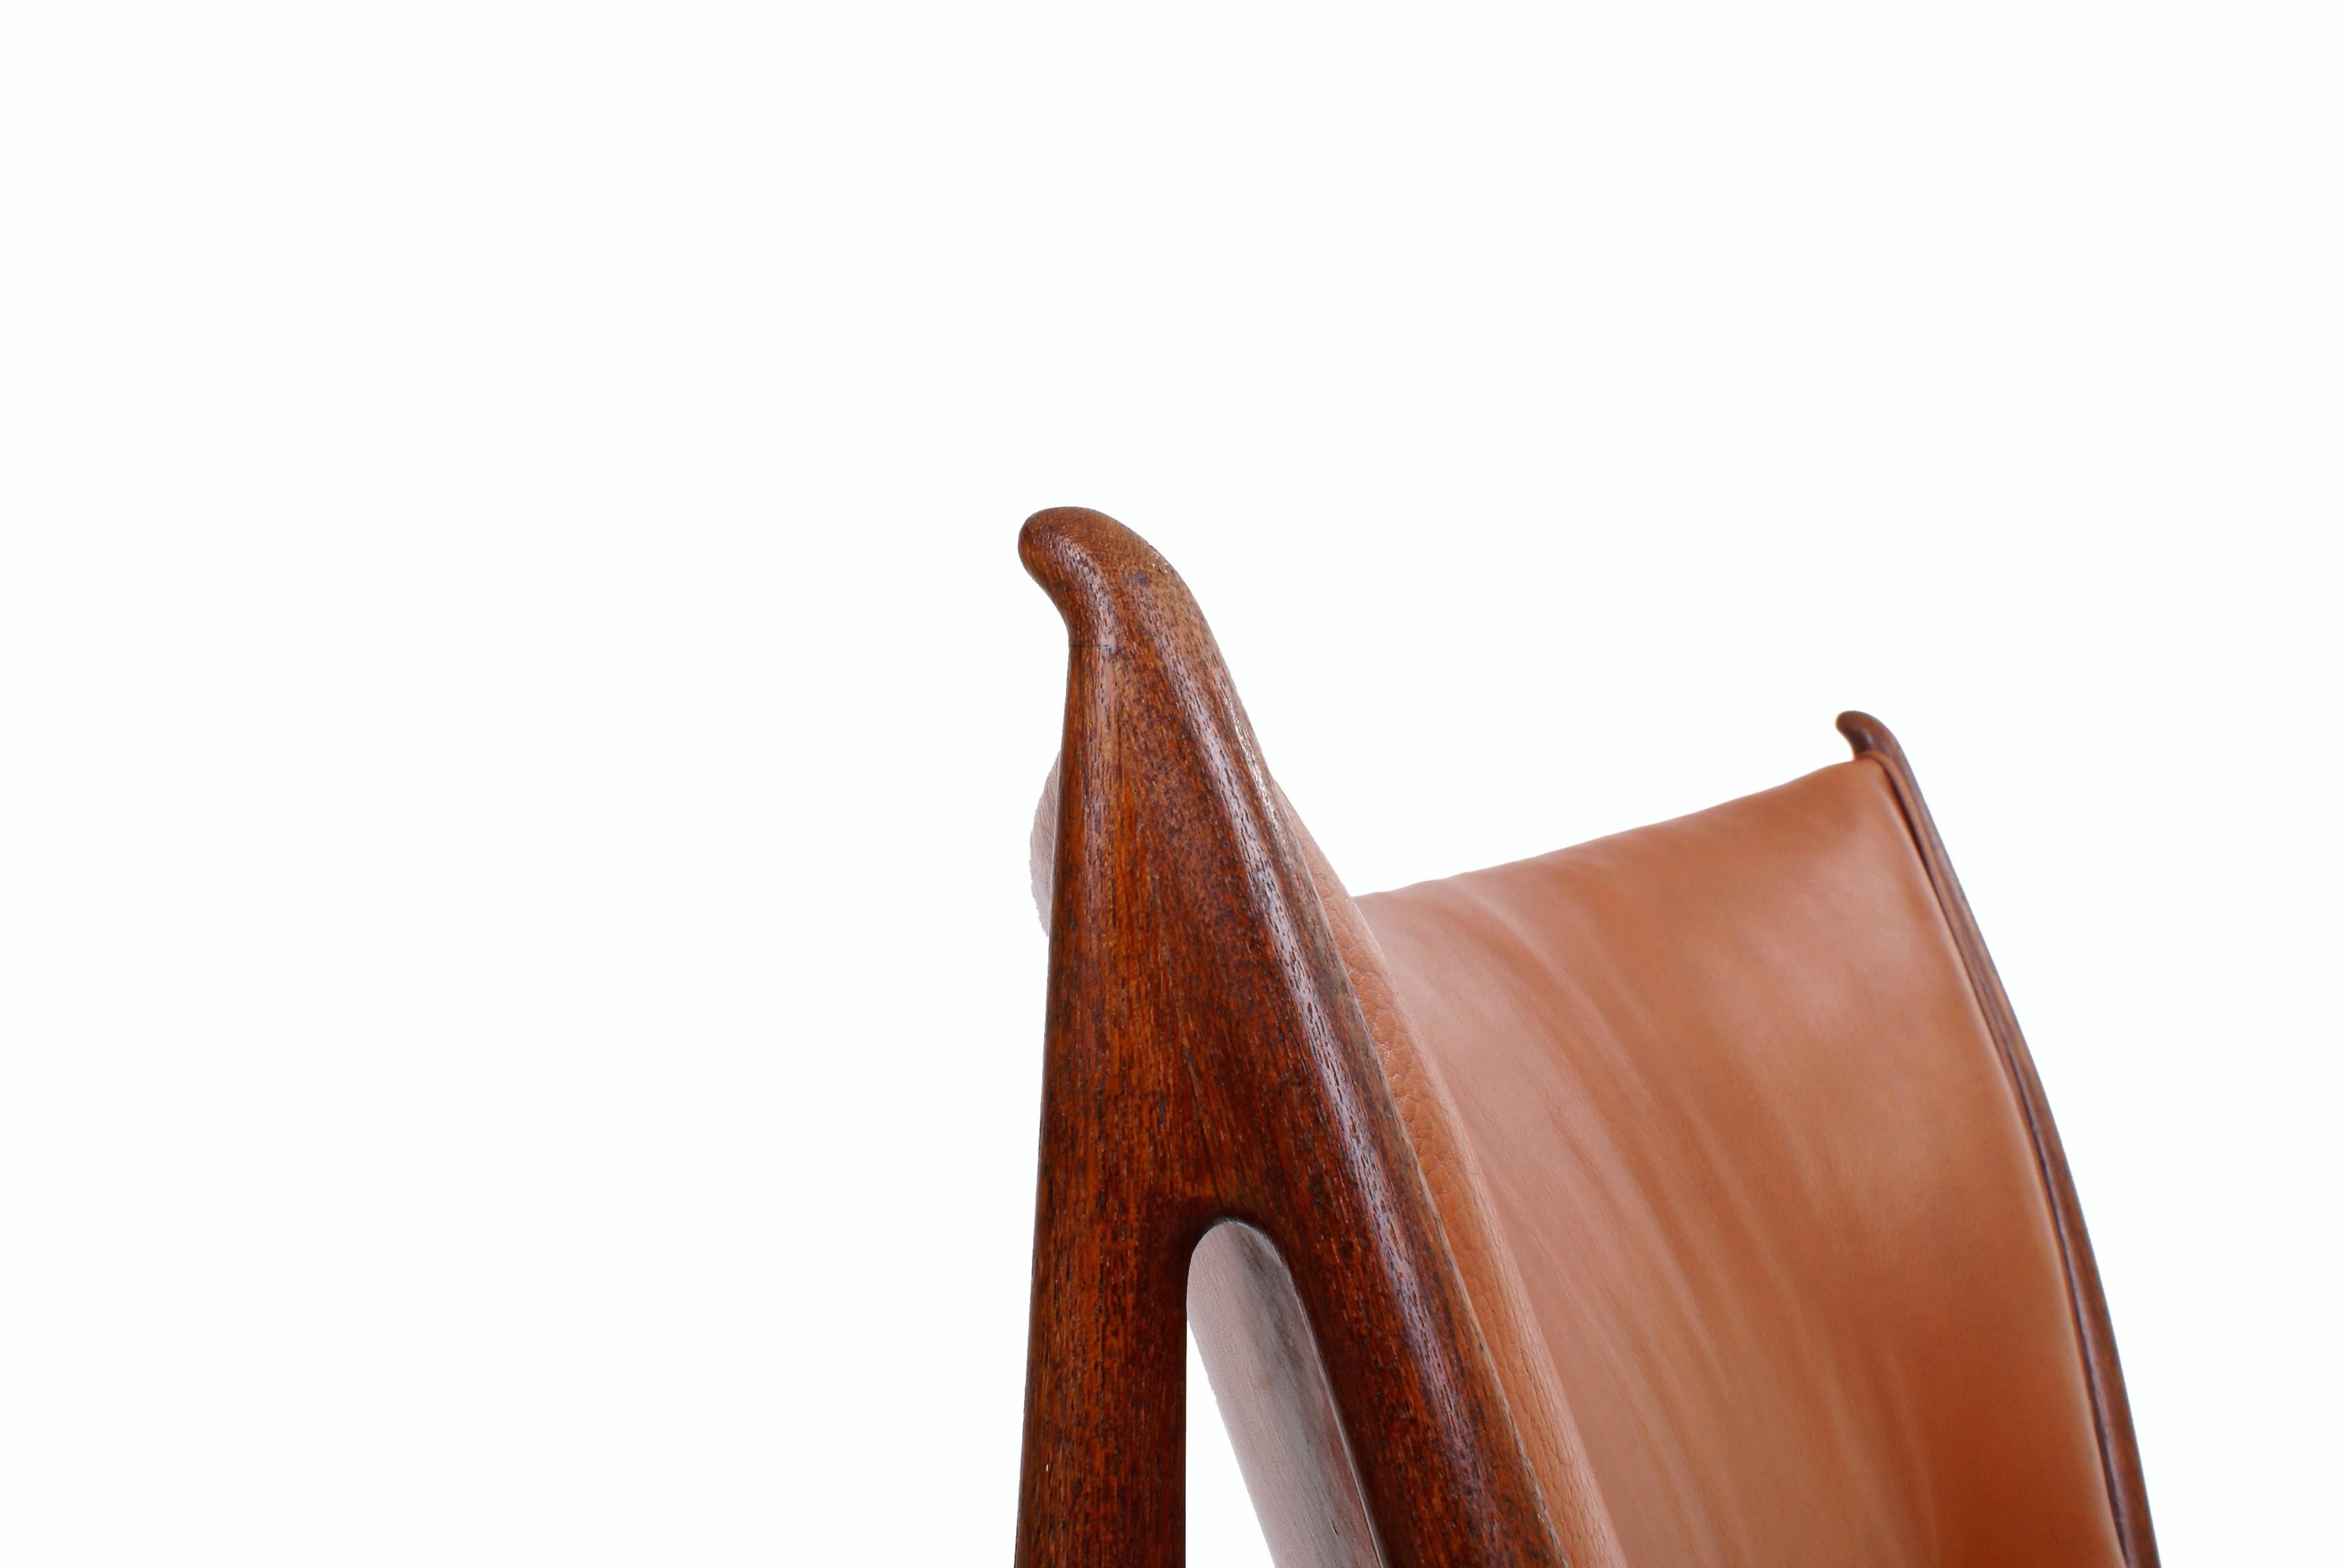 Finn Juhl Rare 'Chieftain' Chair in Teak and Leather for Niels Vodder, 1949 For Sale 3